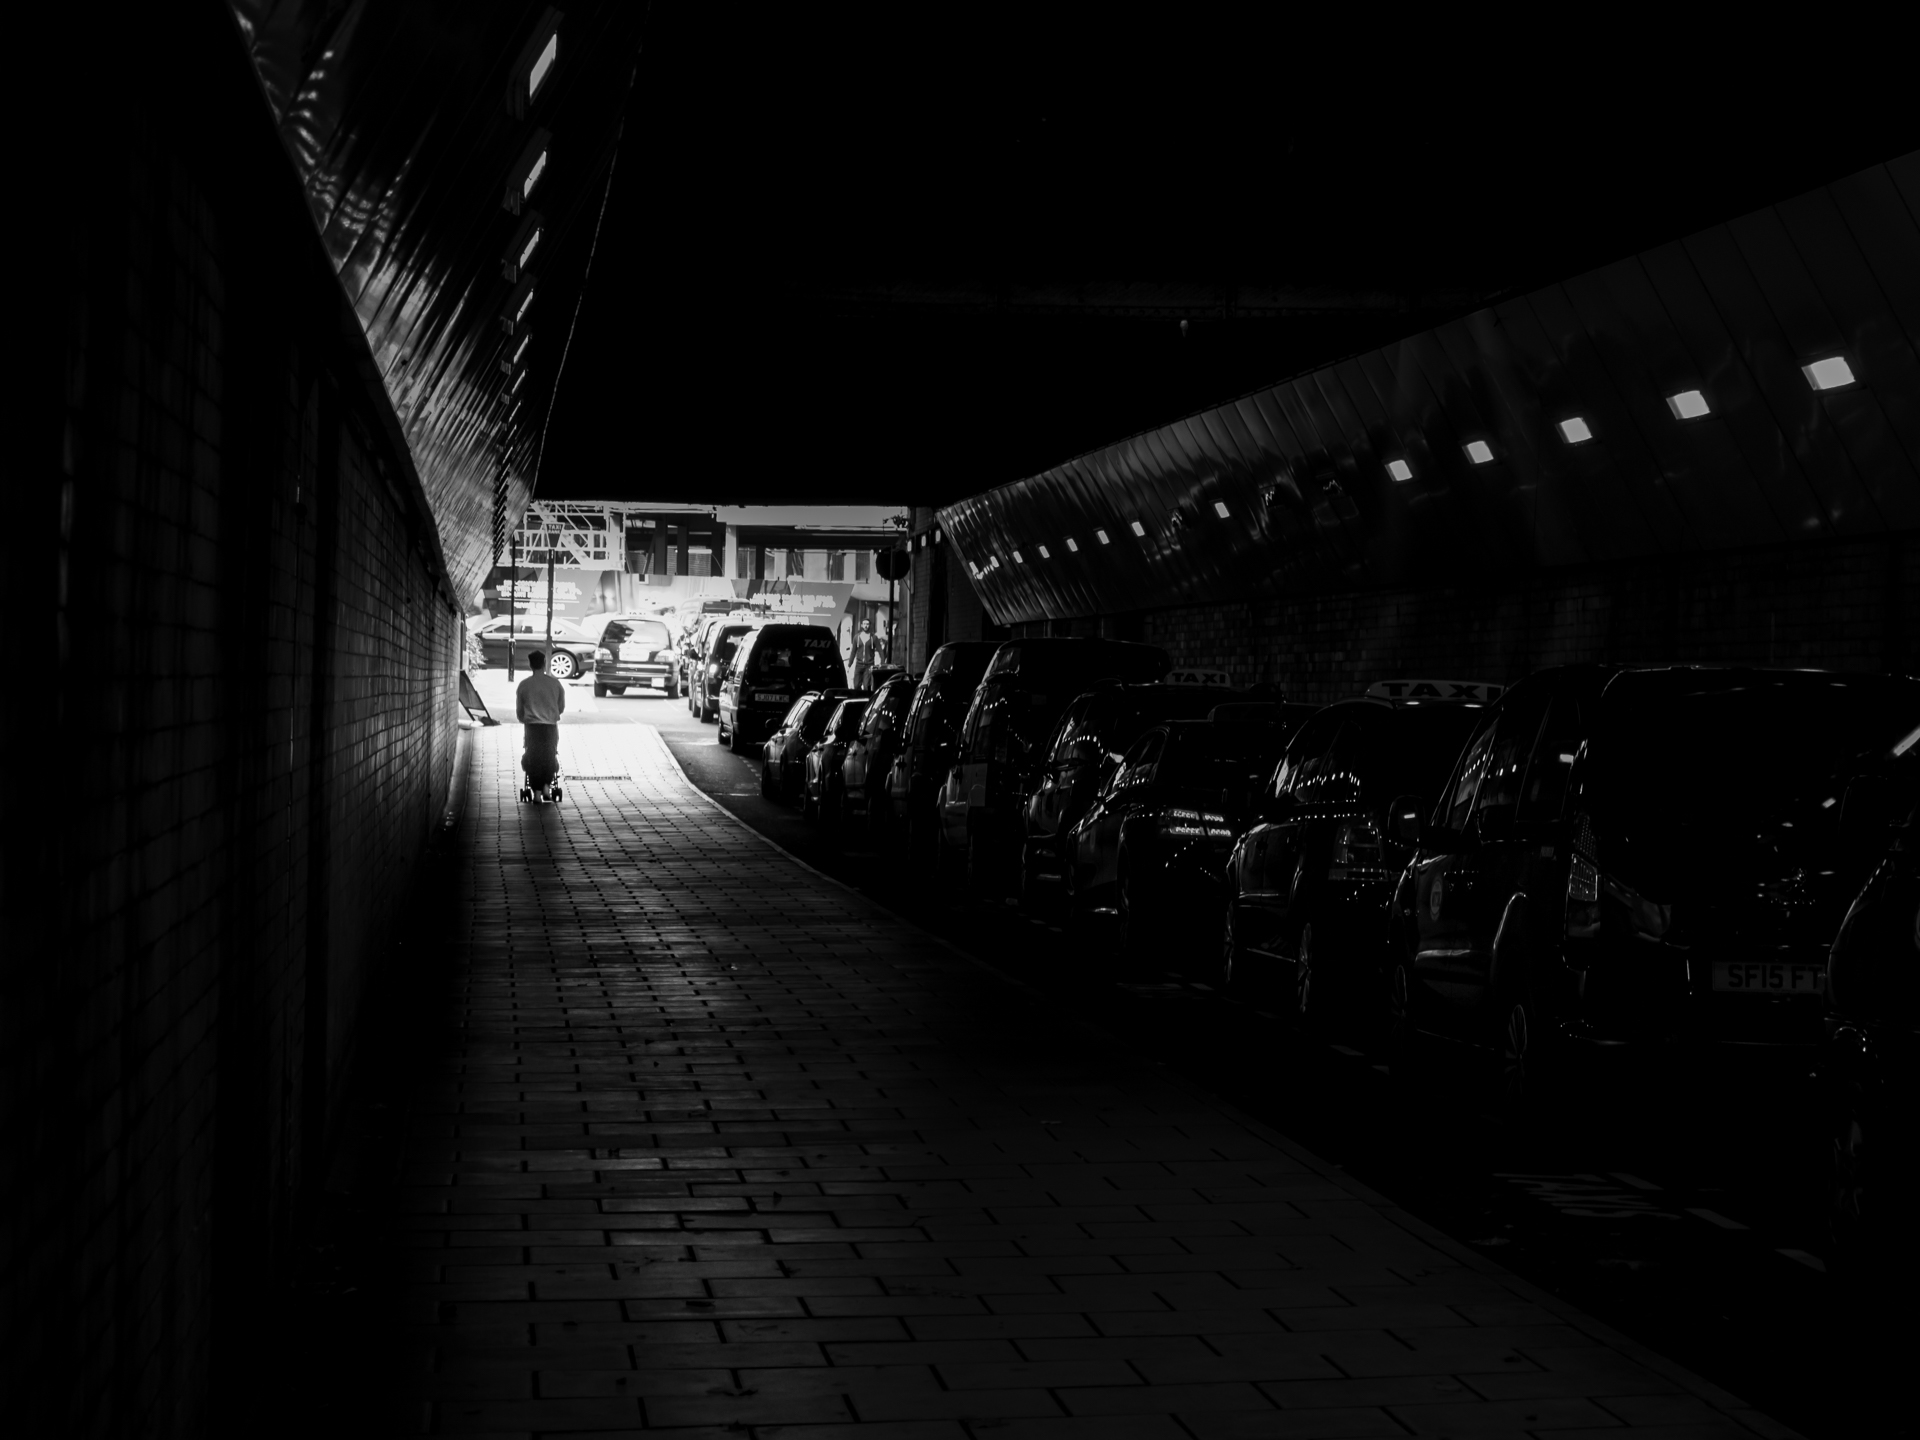 Tunnel Black and white image